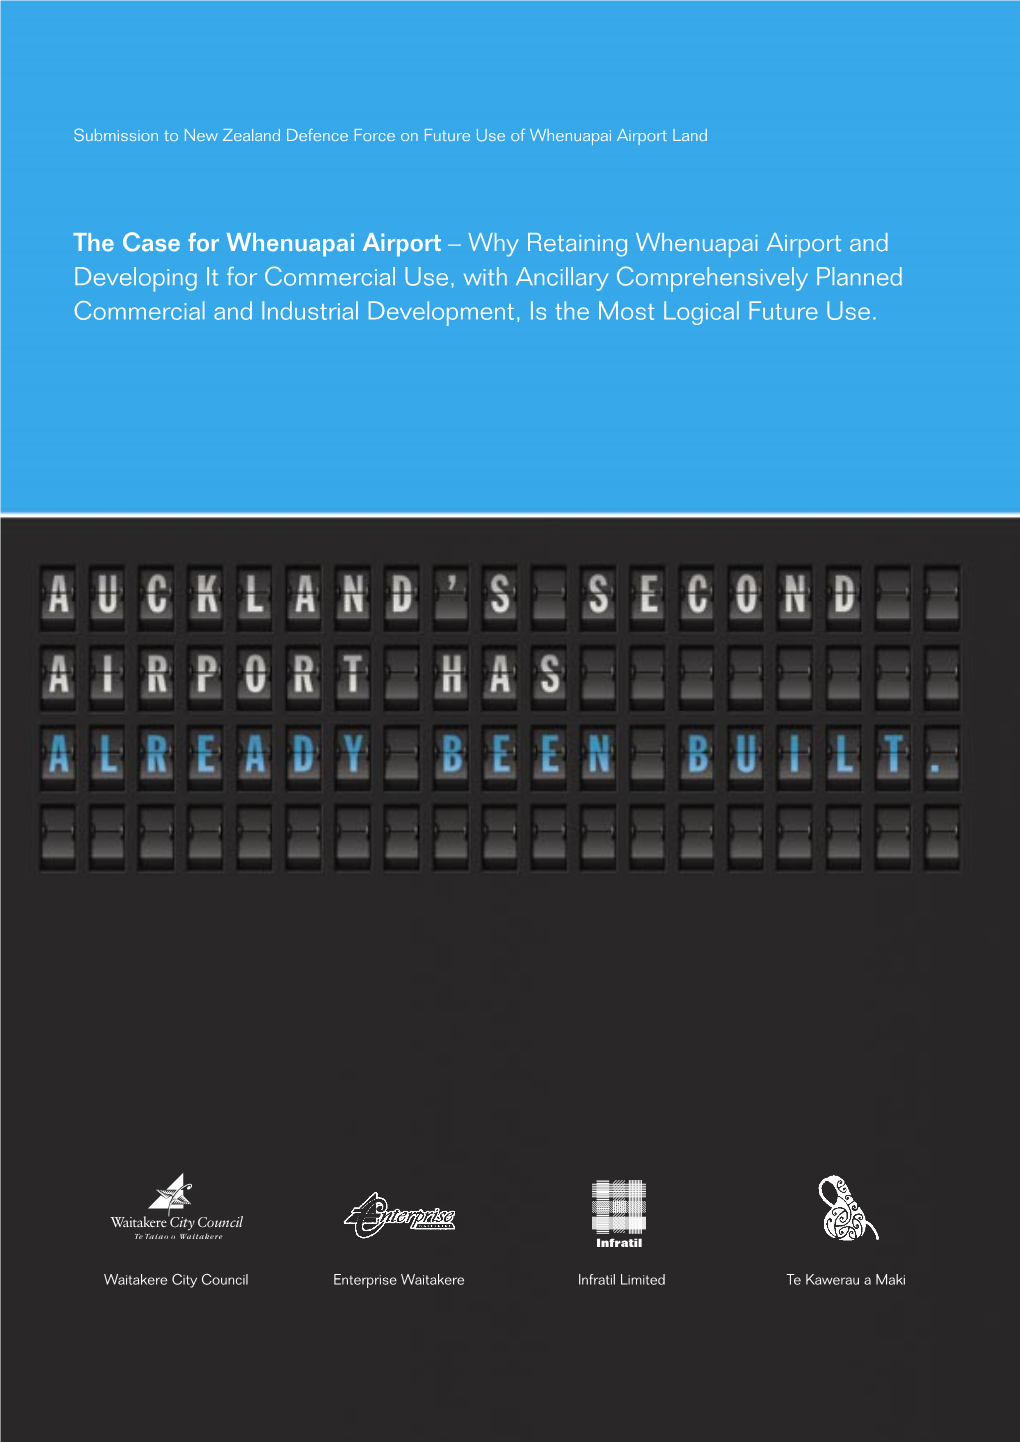 Why Retaining Whenuapai Airport and Developing It for Commercial Use